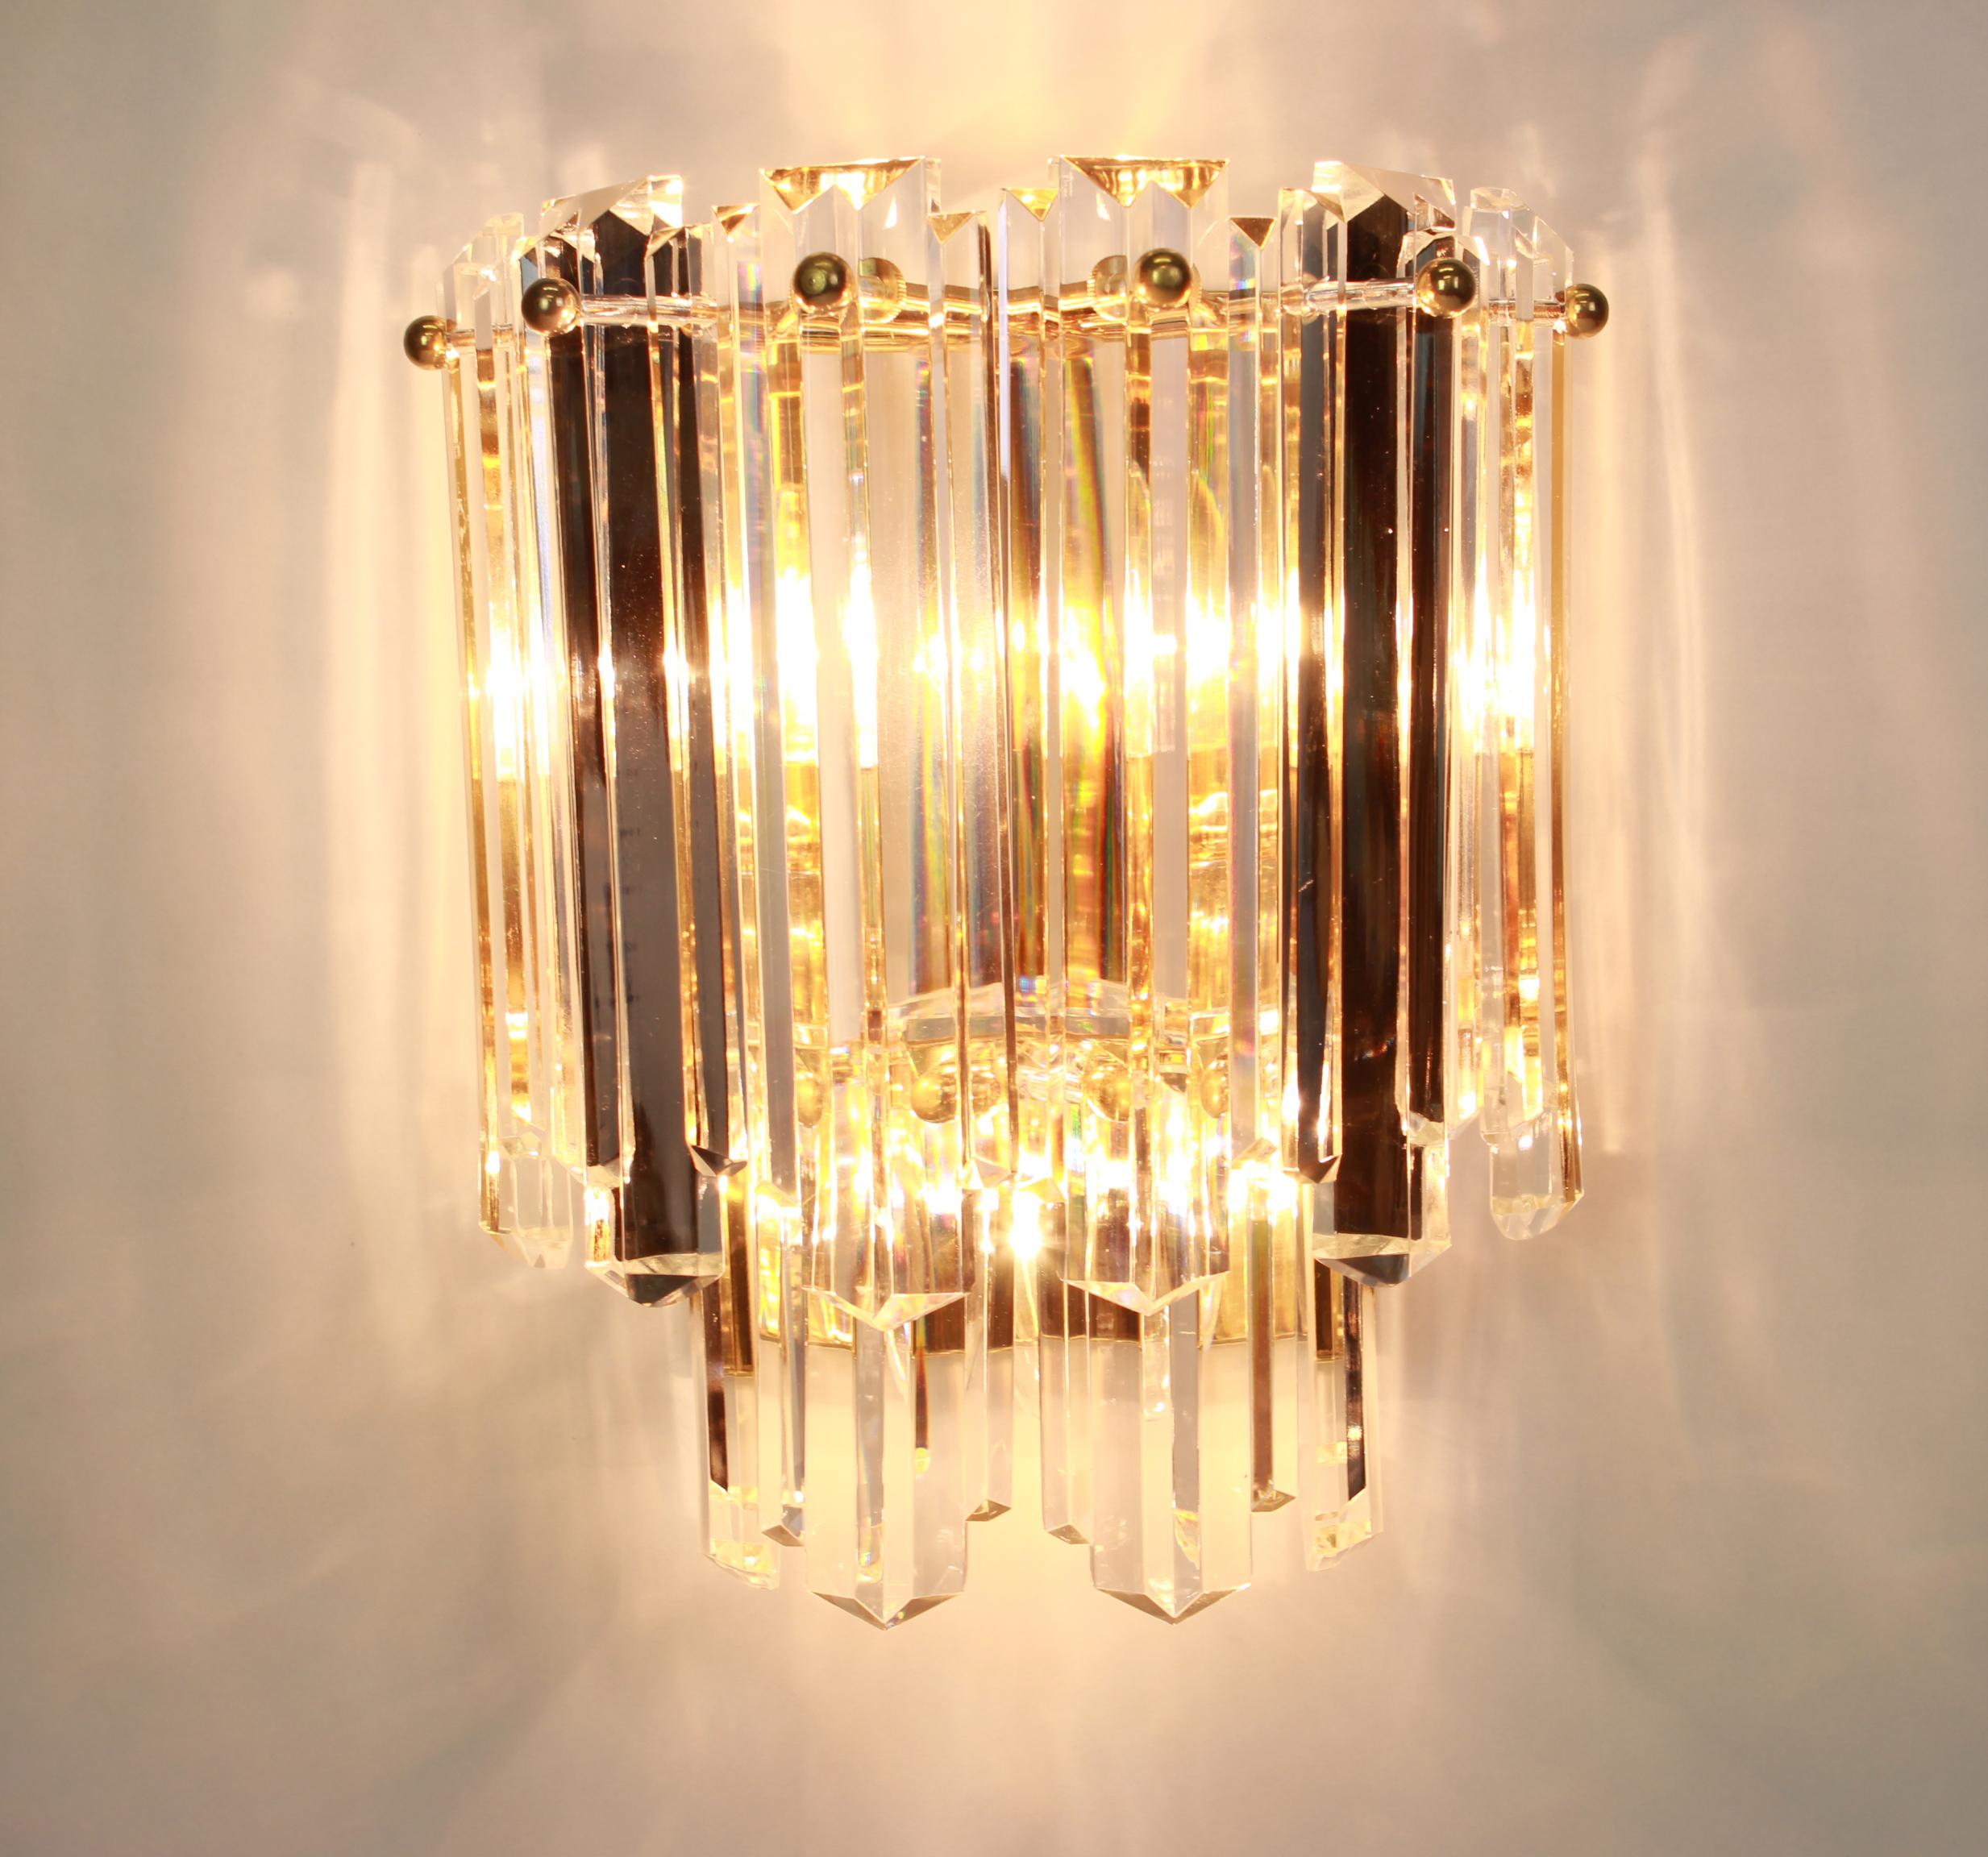 Pair of Large Kalmar Crystal Glass Sconces Wall Lights, Austria, 1970s For Sale 1